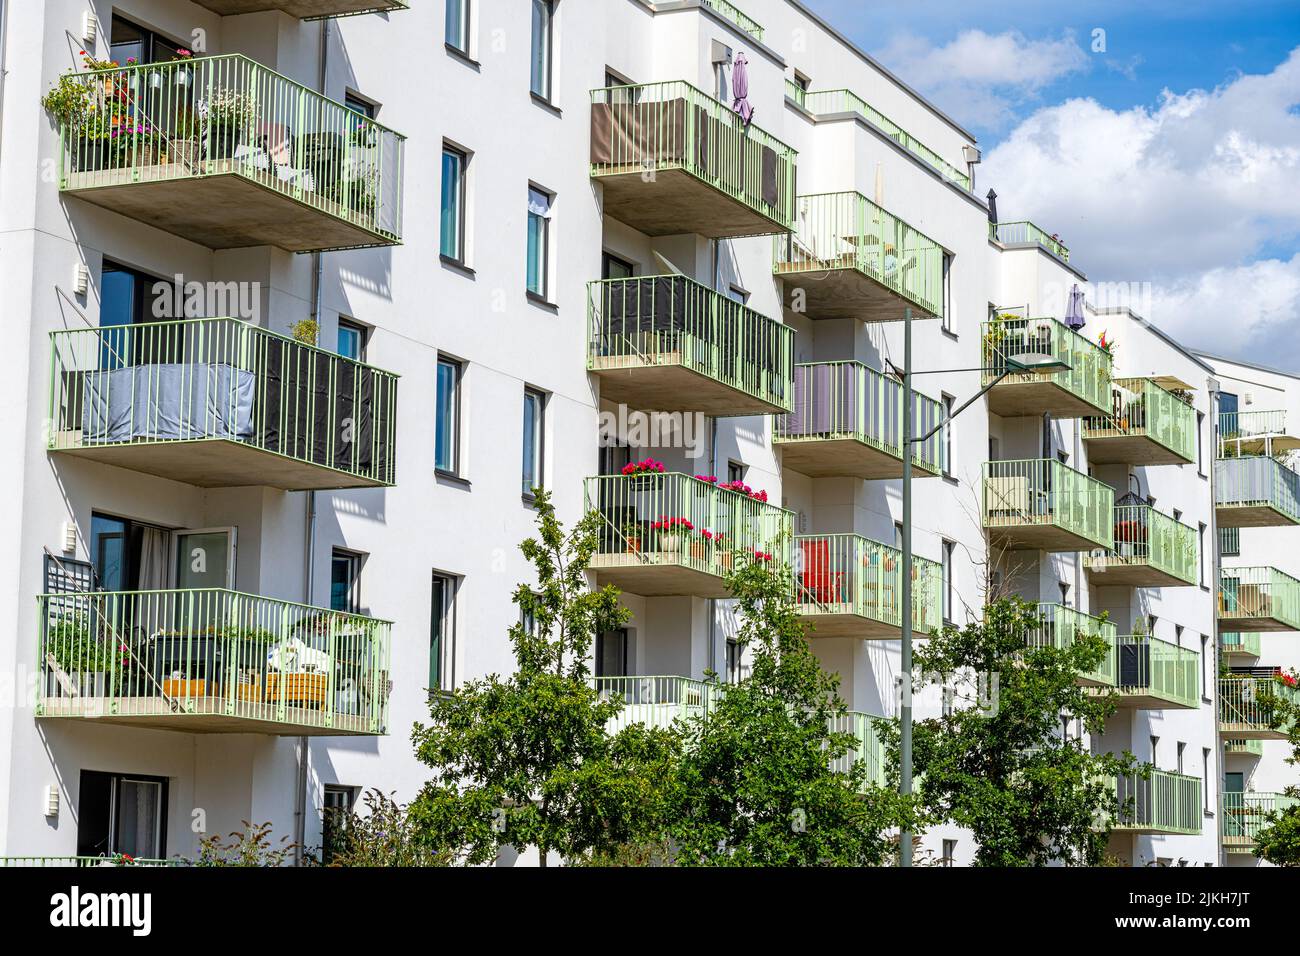 White residential building with many balconies seen in Berlin, Germany Stock Photo